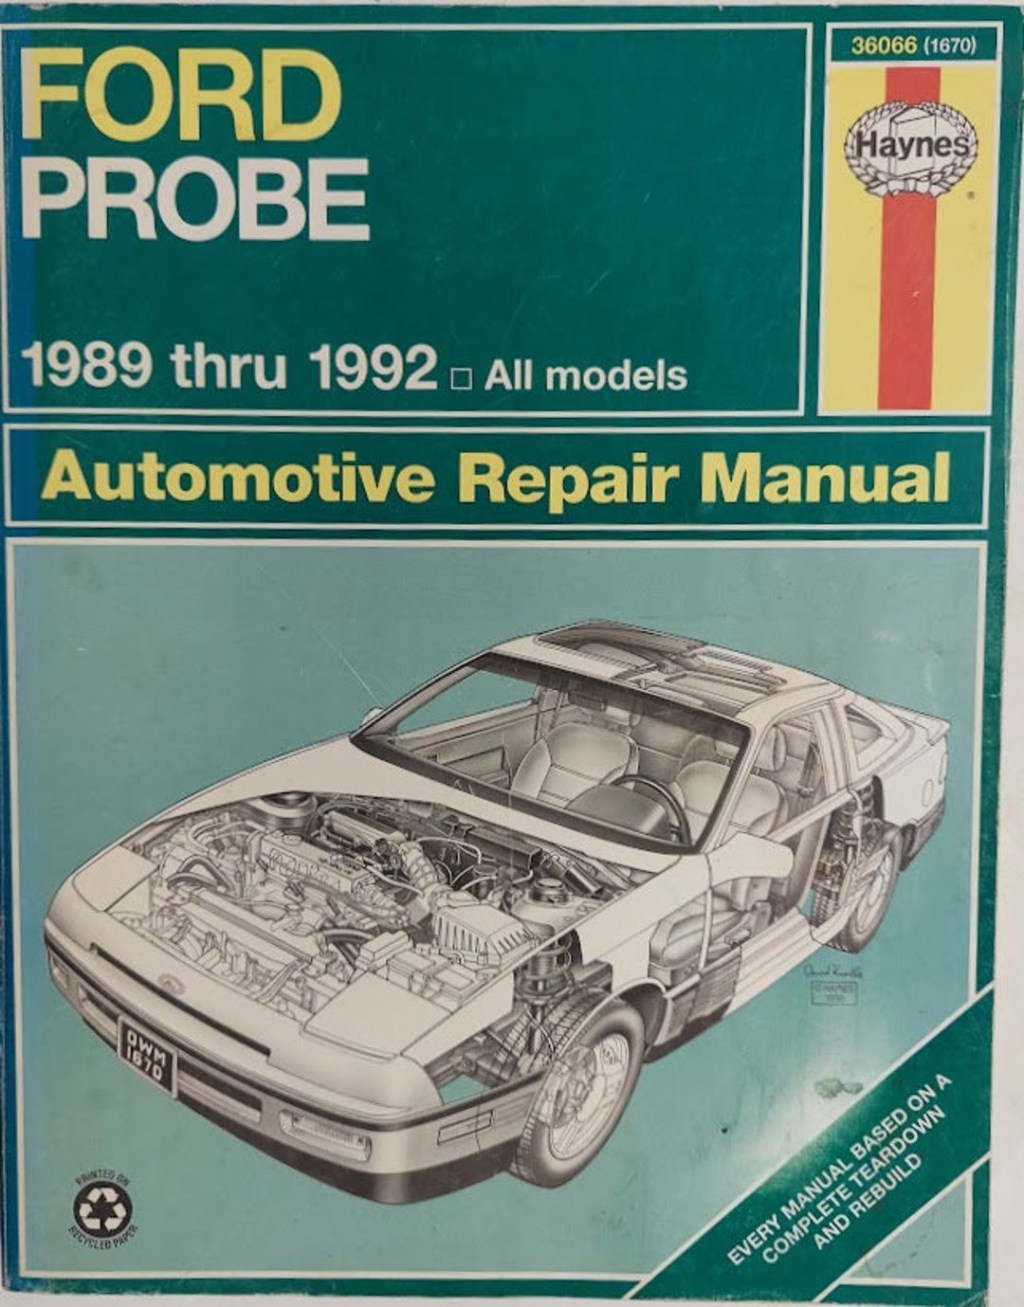 Picture of: Haynes Auto Repair Manual Ford Probe   – Etsy Österreich